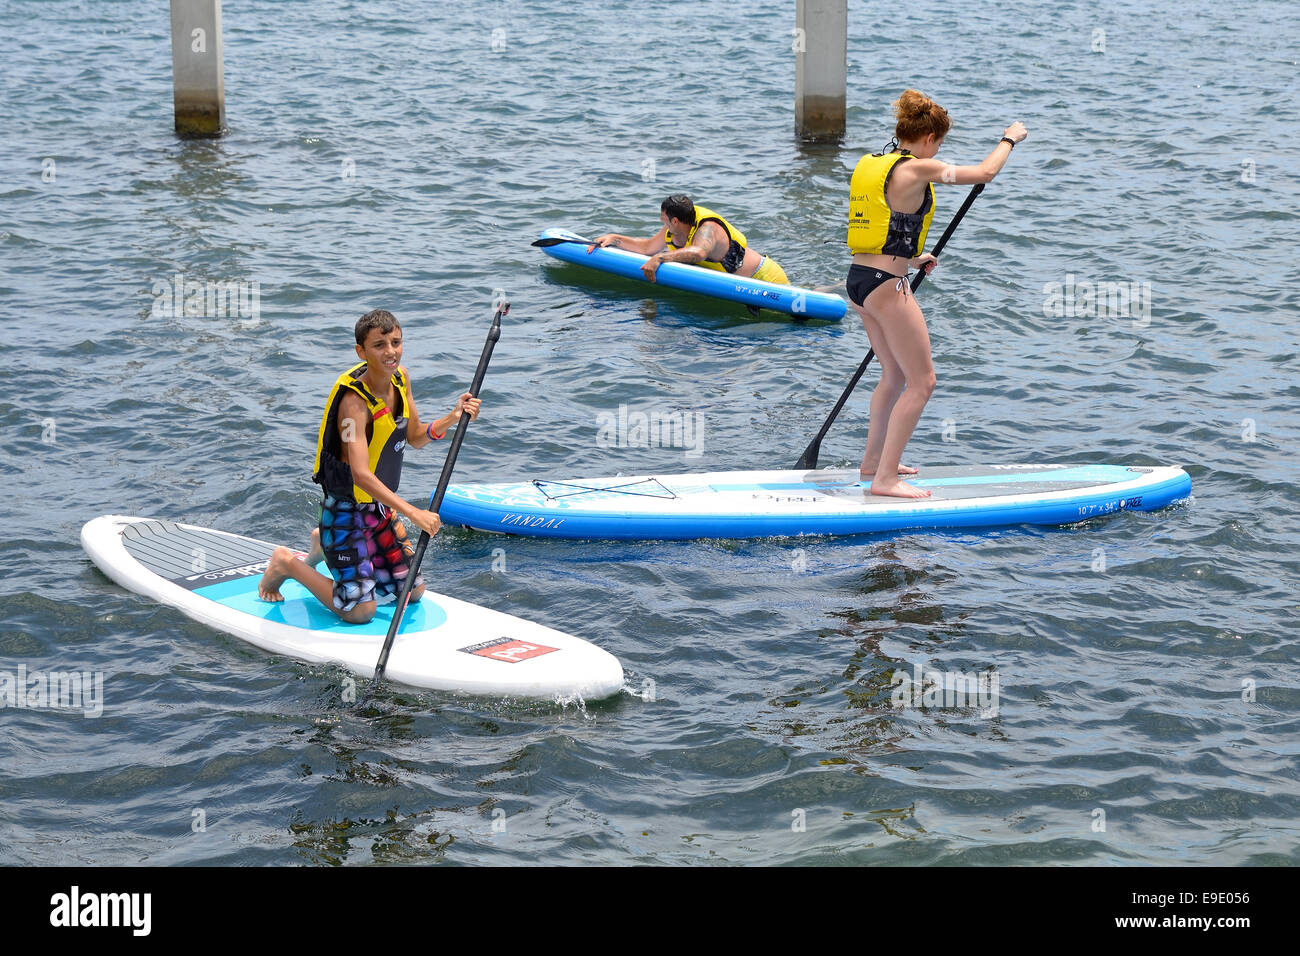 BARCELONA - JUN 28: People doing Stand up paddle surfing, or boarding (SUP), at LKXA Extreme Sports Barcelona Games. Stock Photo